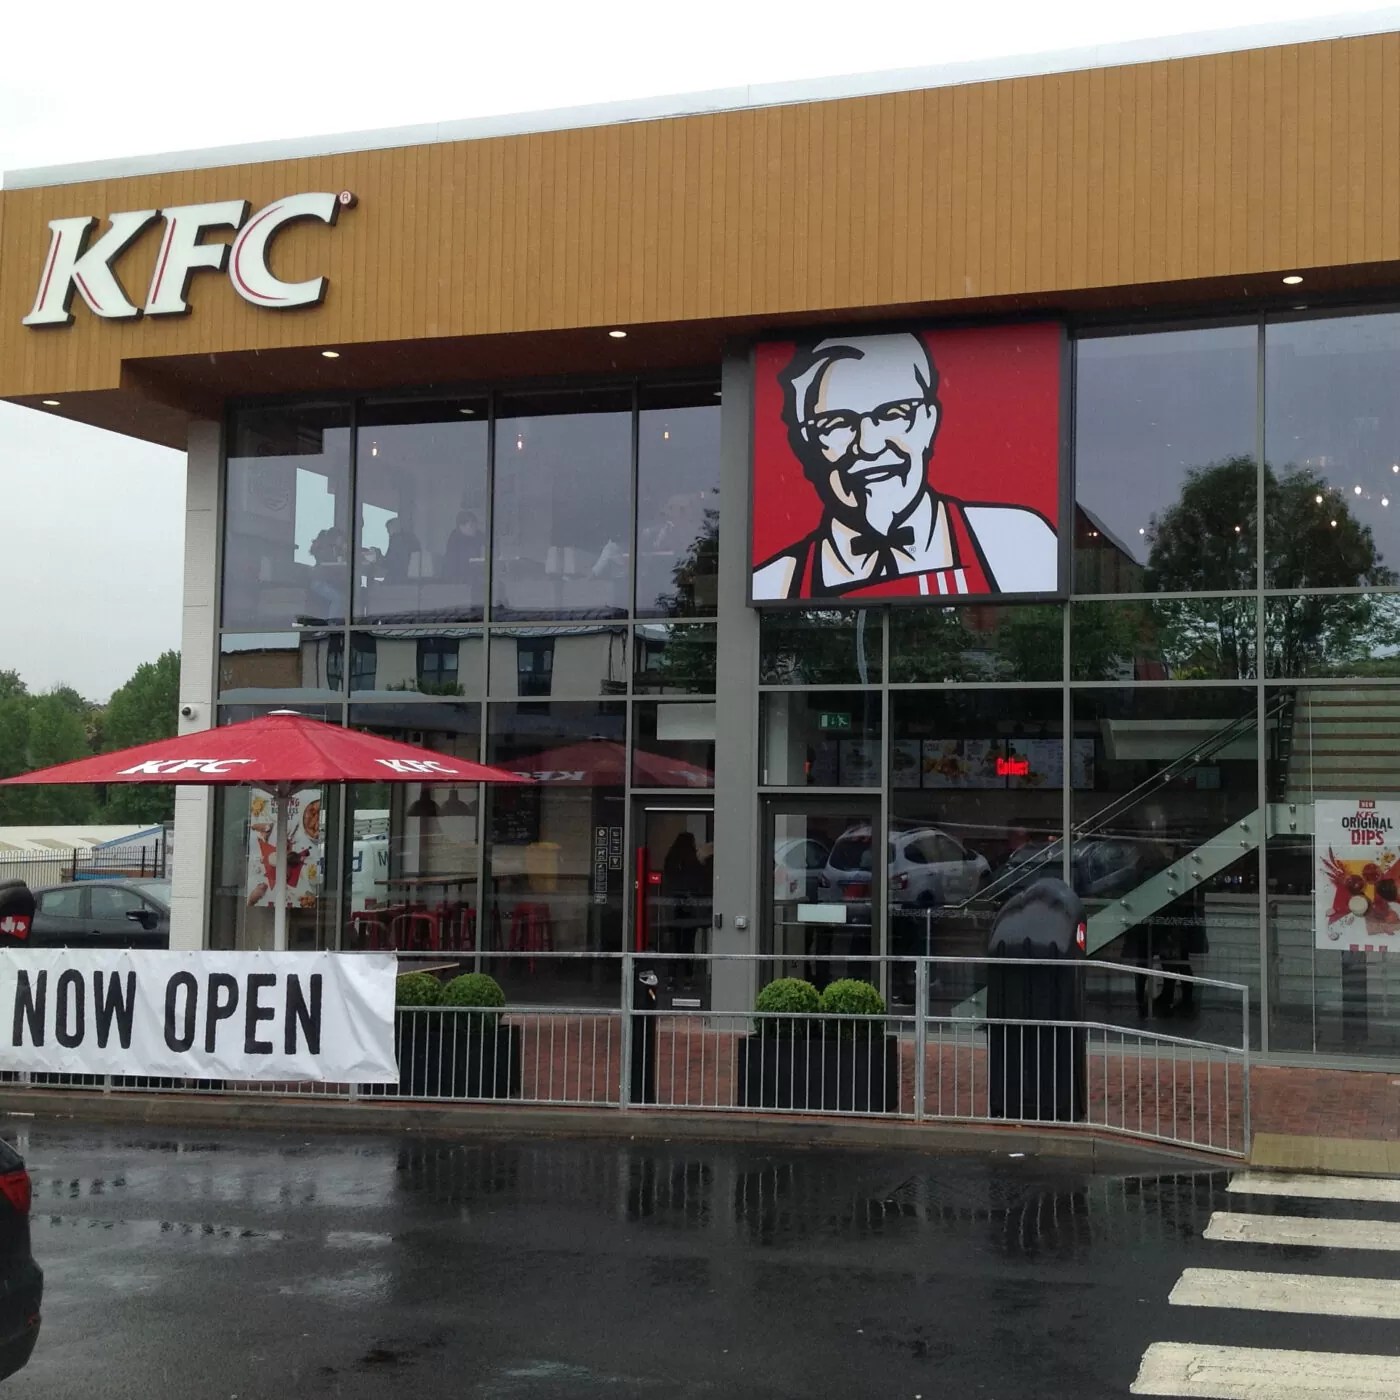 First two-storey KFC with Accoya rainscreen cladding details